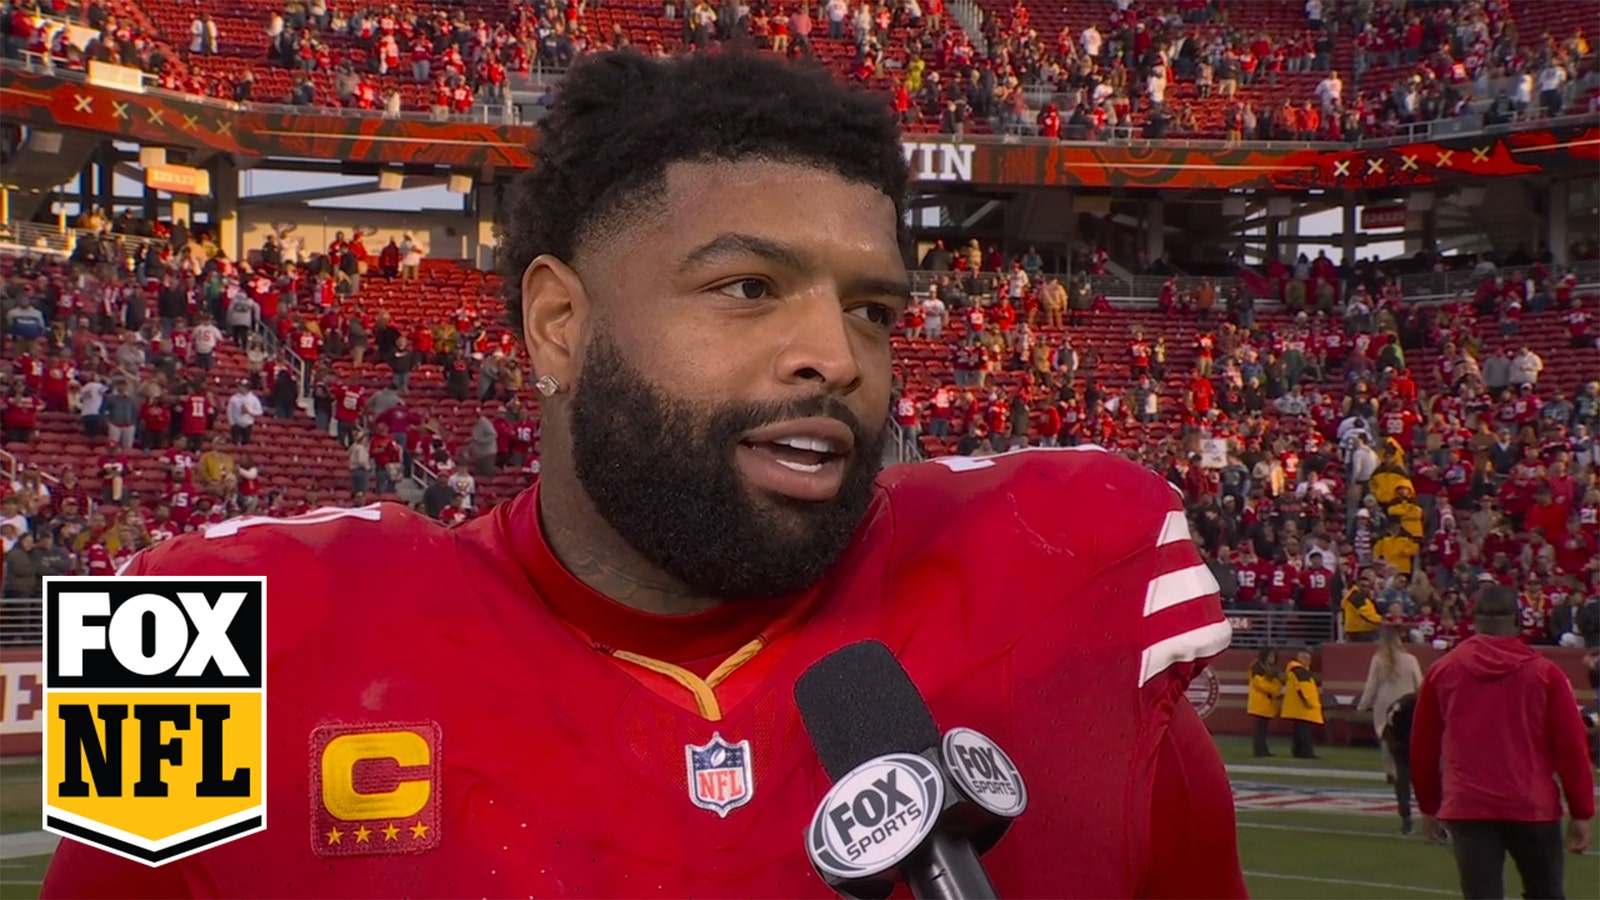 Trent Williams to Brock Purdy doubters: "Turn on the film"